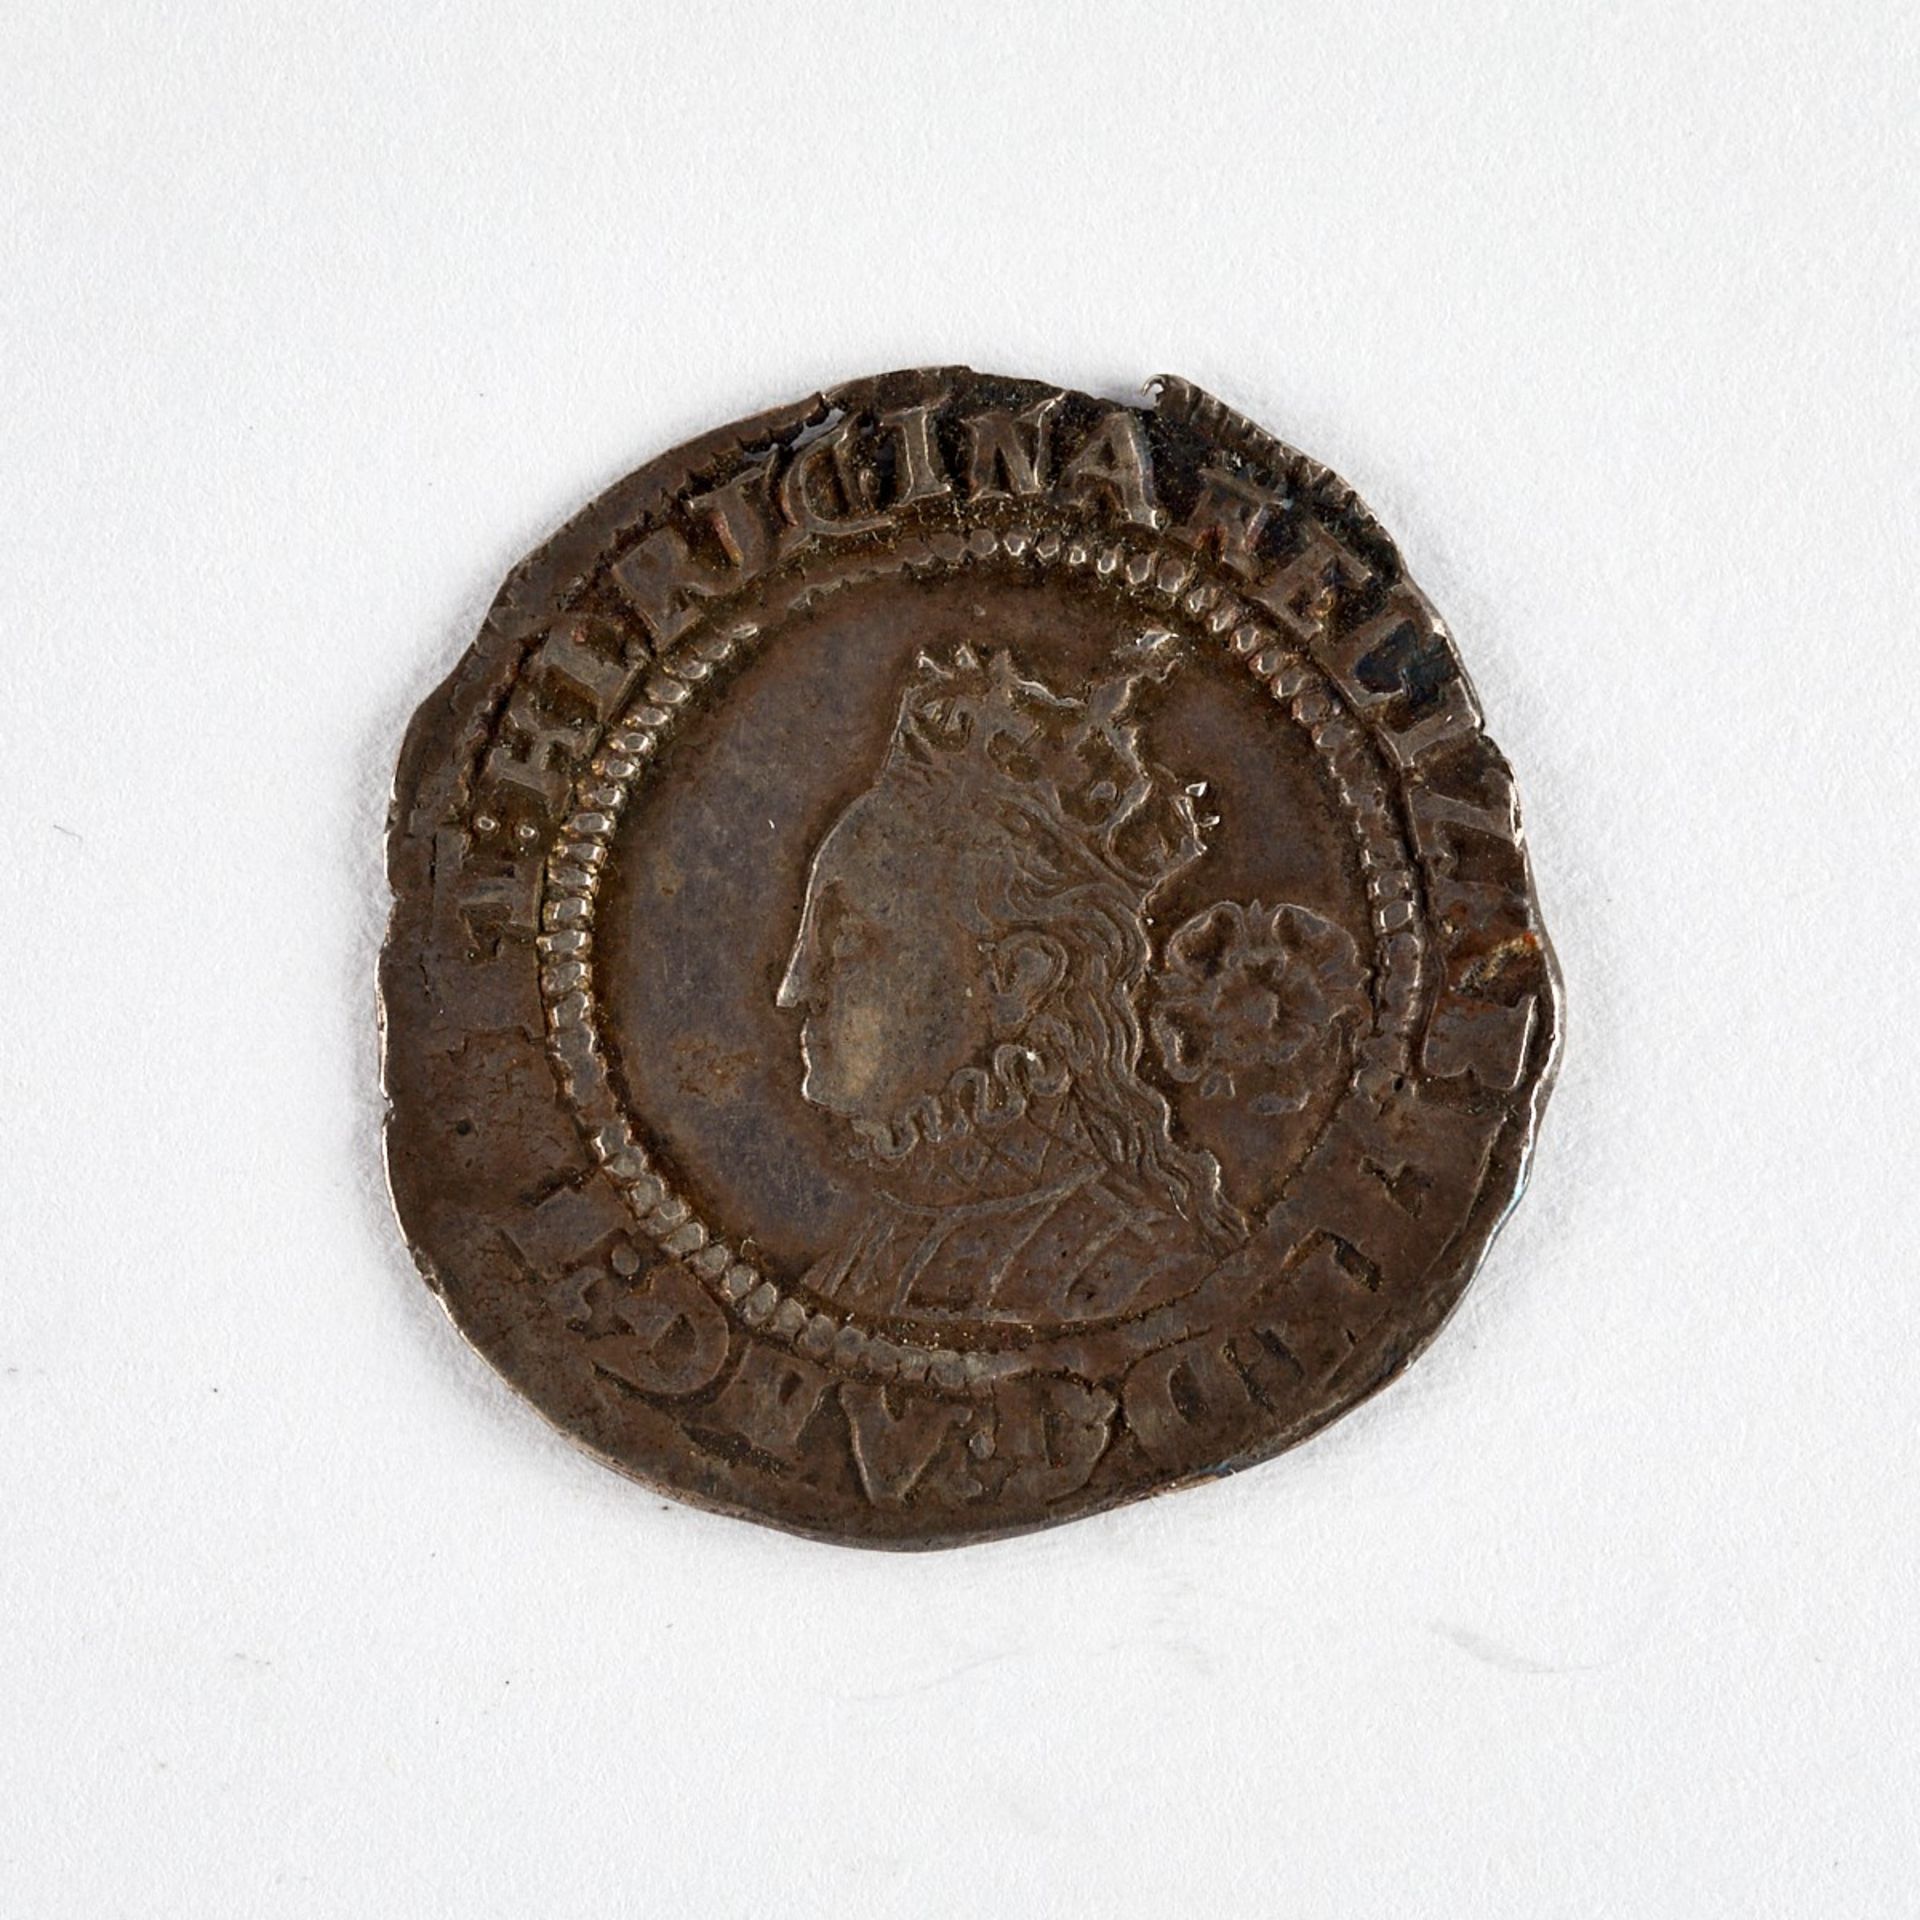 1571 Elizabeth I 3rd Issue Sixpence Crown MM - Image 2 of 3